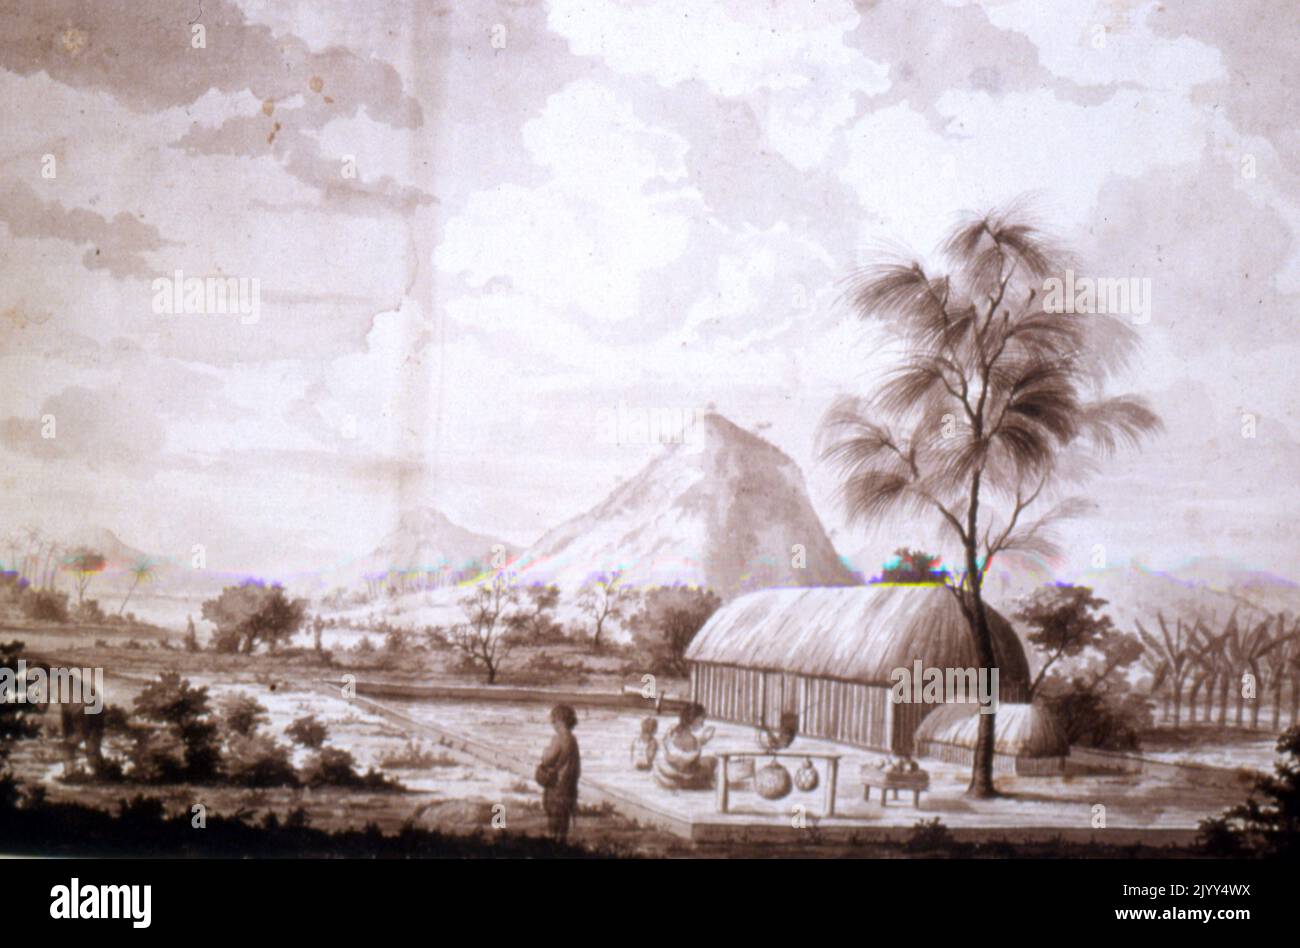 Chiefs house in Tahiti by Sydney Parkinson (c. 1745 - 1771), by Sydney Parkinson (c. 1745 - 1771), a Scottish botanical illustrator and natural history artist. He was the first European artist to visit Australia, New Zealand and Tahiti. Parkinson was employed by Joseph Banks to travel with him on James Cook's first voyage to the Pacific in 1768, in HMS Endeavour. Stock Photo